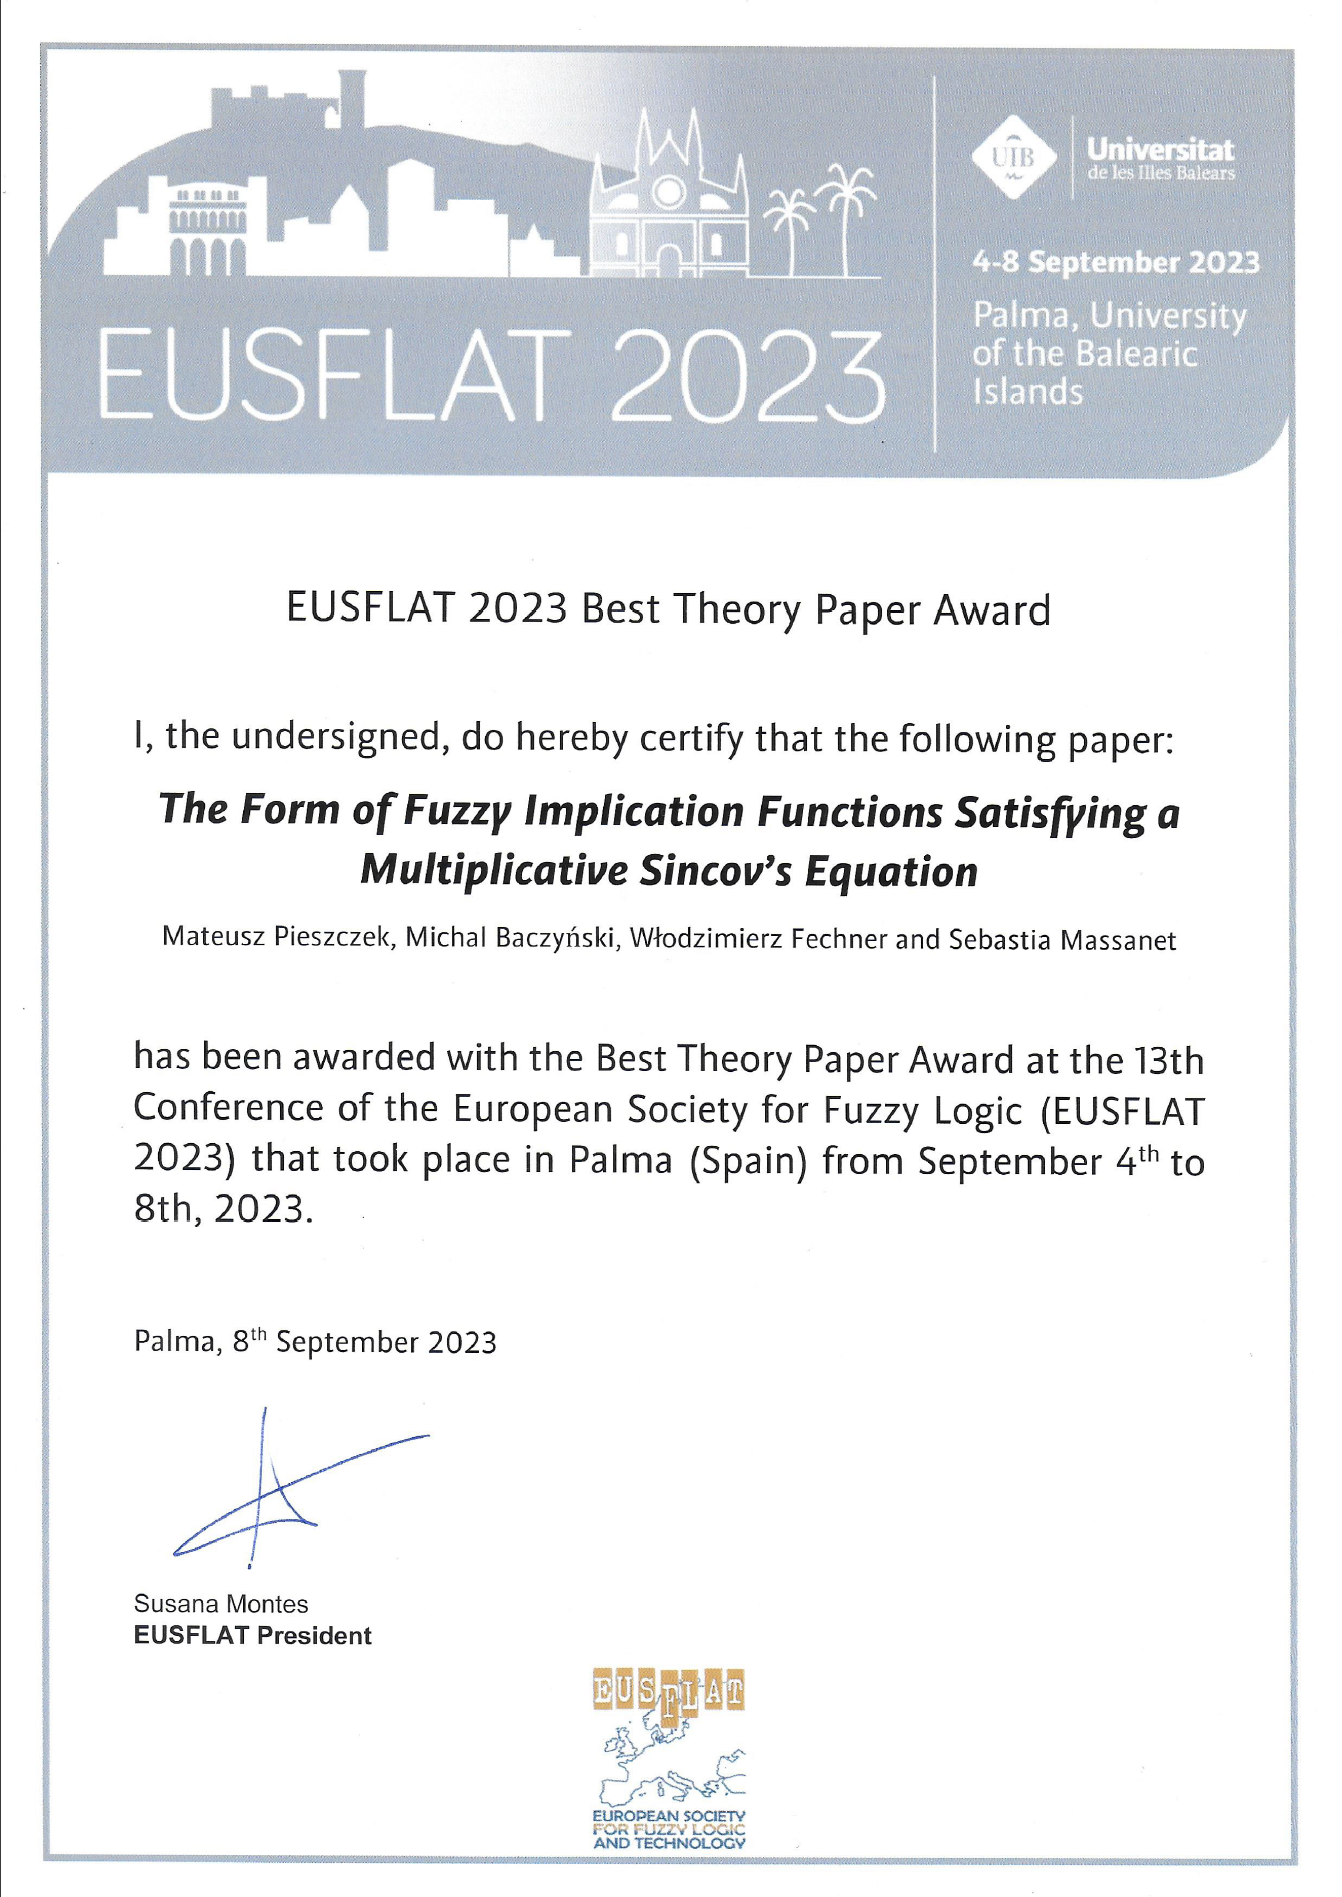 EUSFLAT 2023 Best Theory Paper